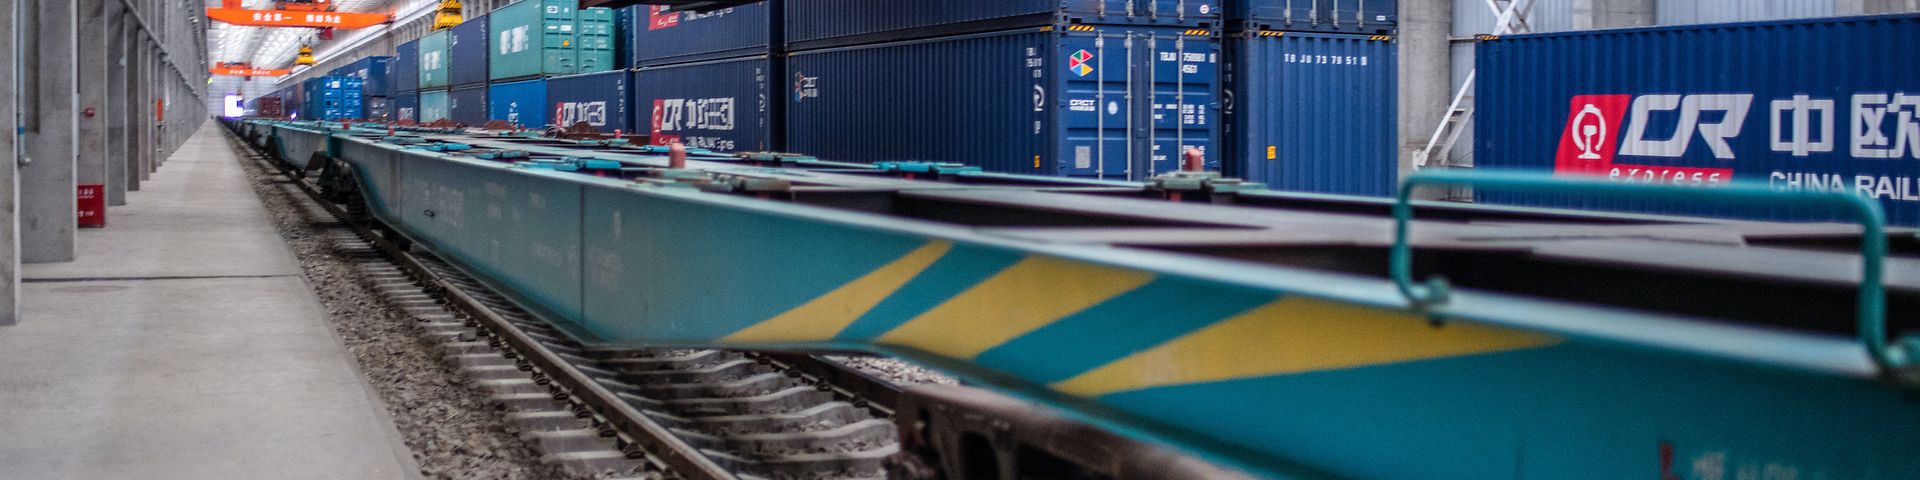 Containerbeladung auf Waggons